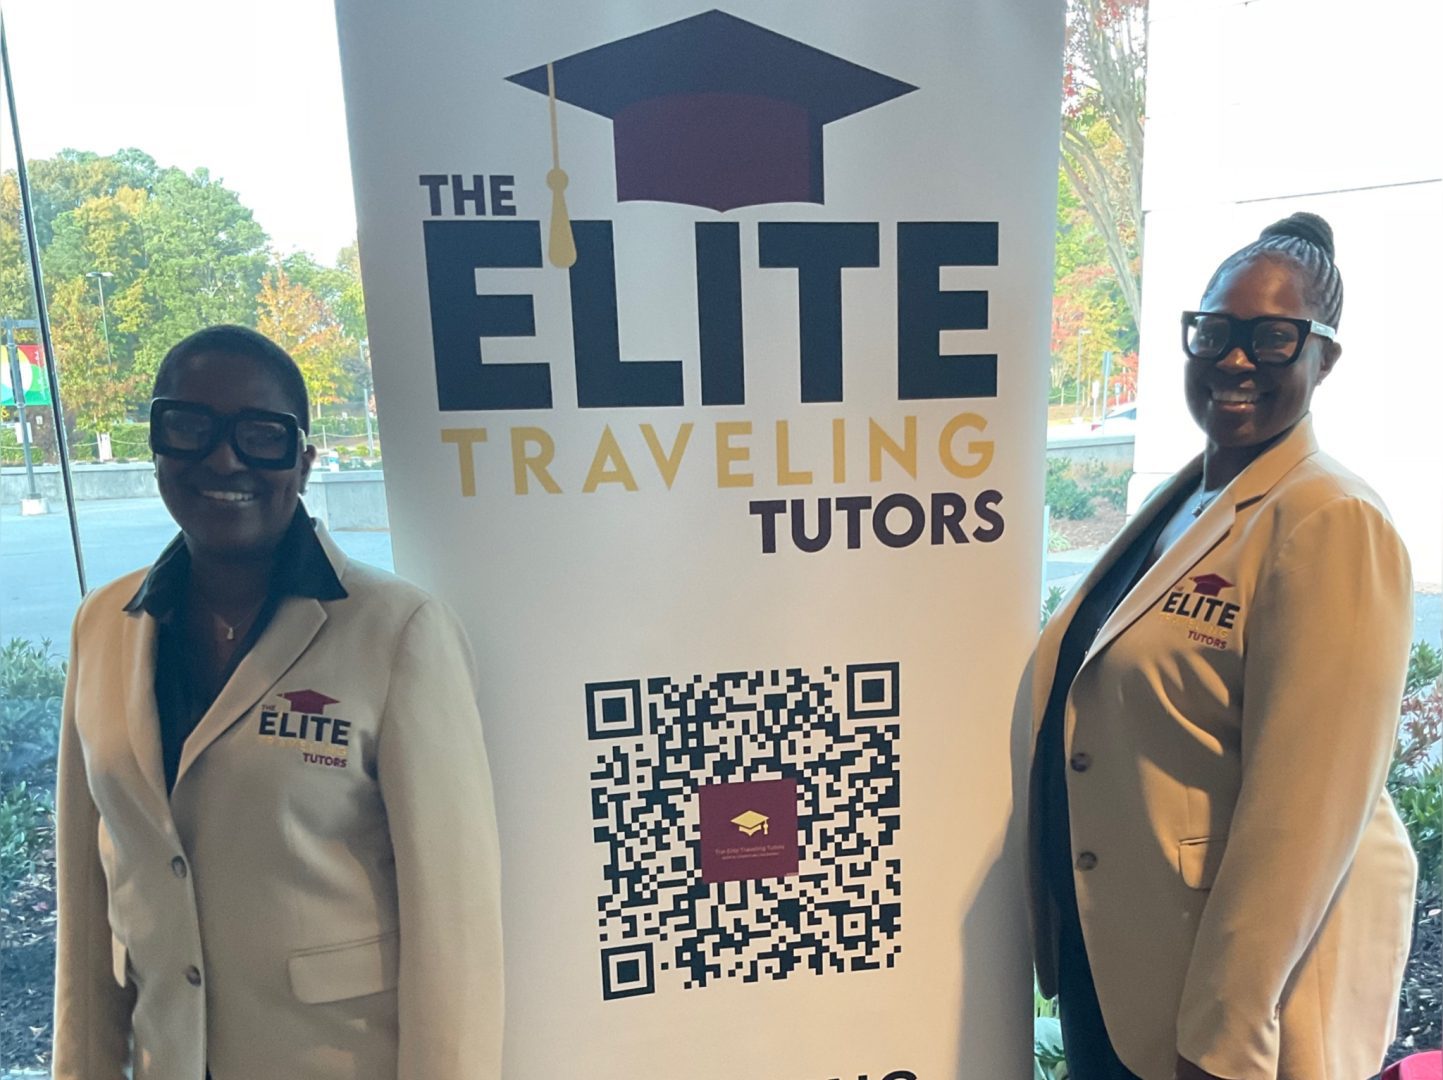 The Elite Traveling Tutors are focused on student growth in the Black community